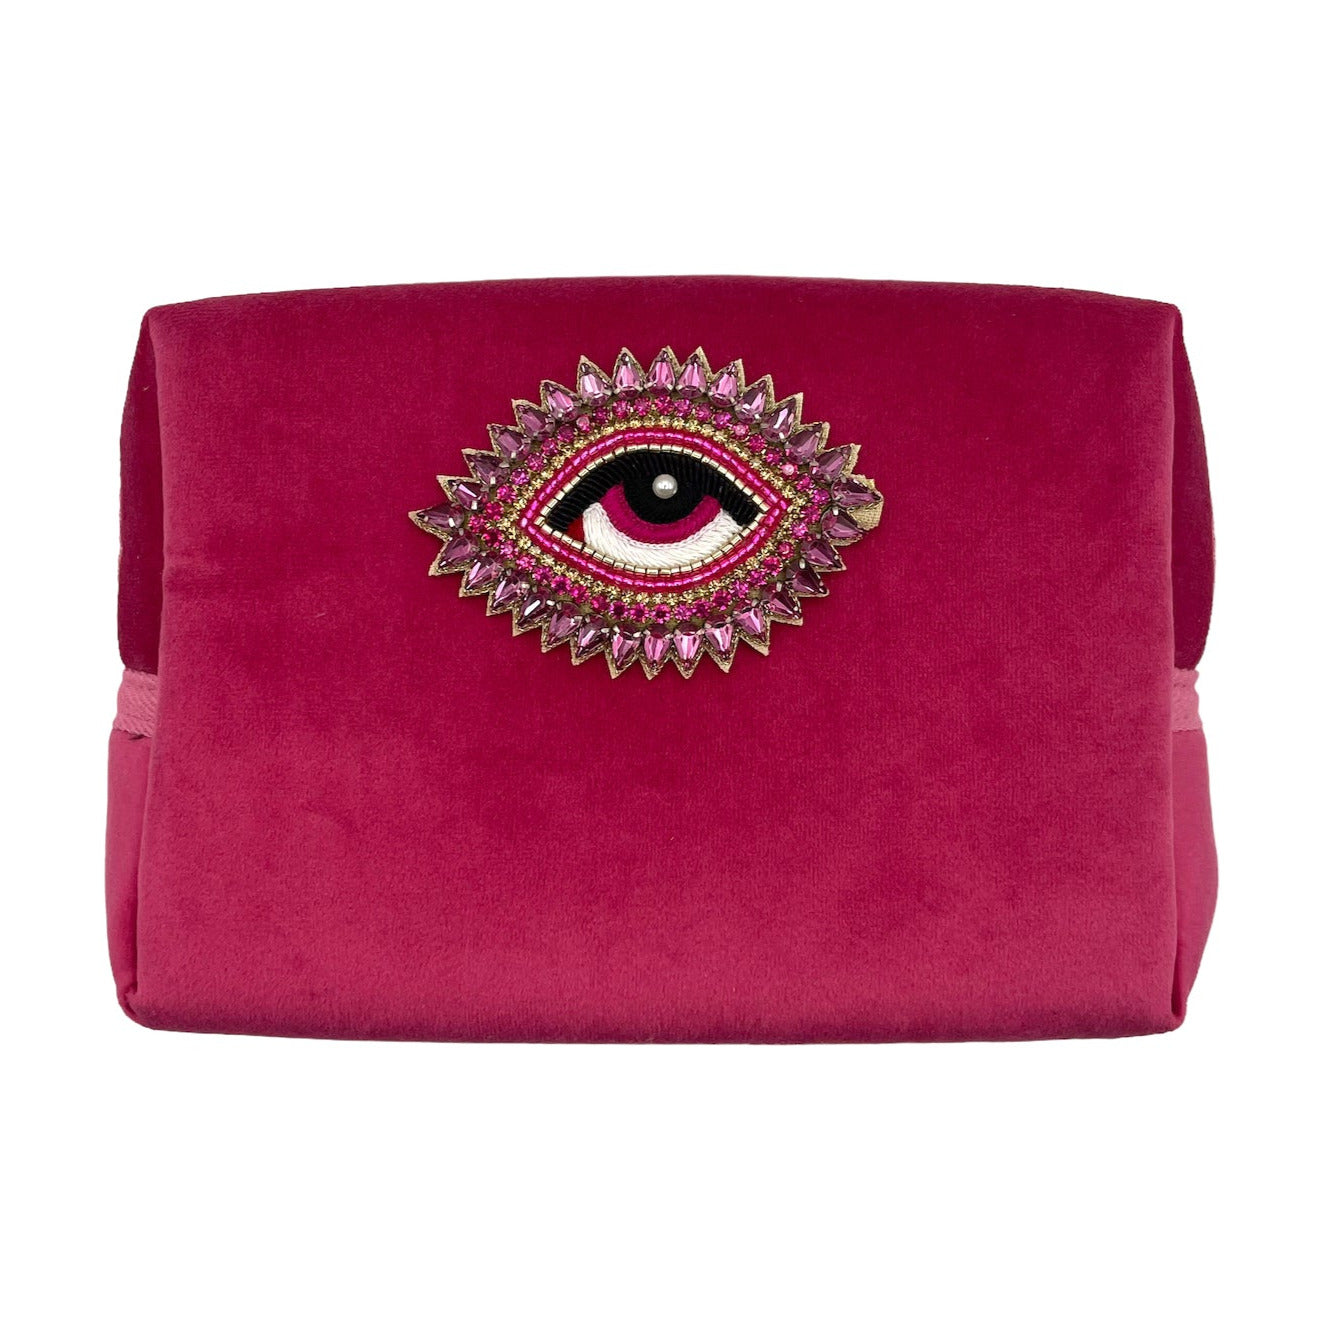 Bright pink make-up bag and a rose eye pink - recycled velvet